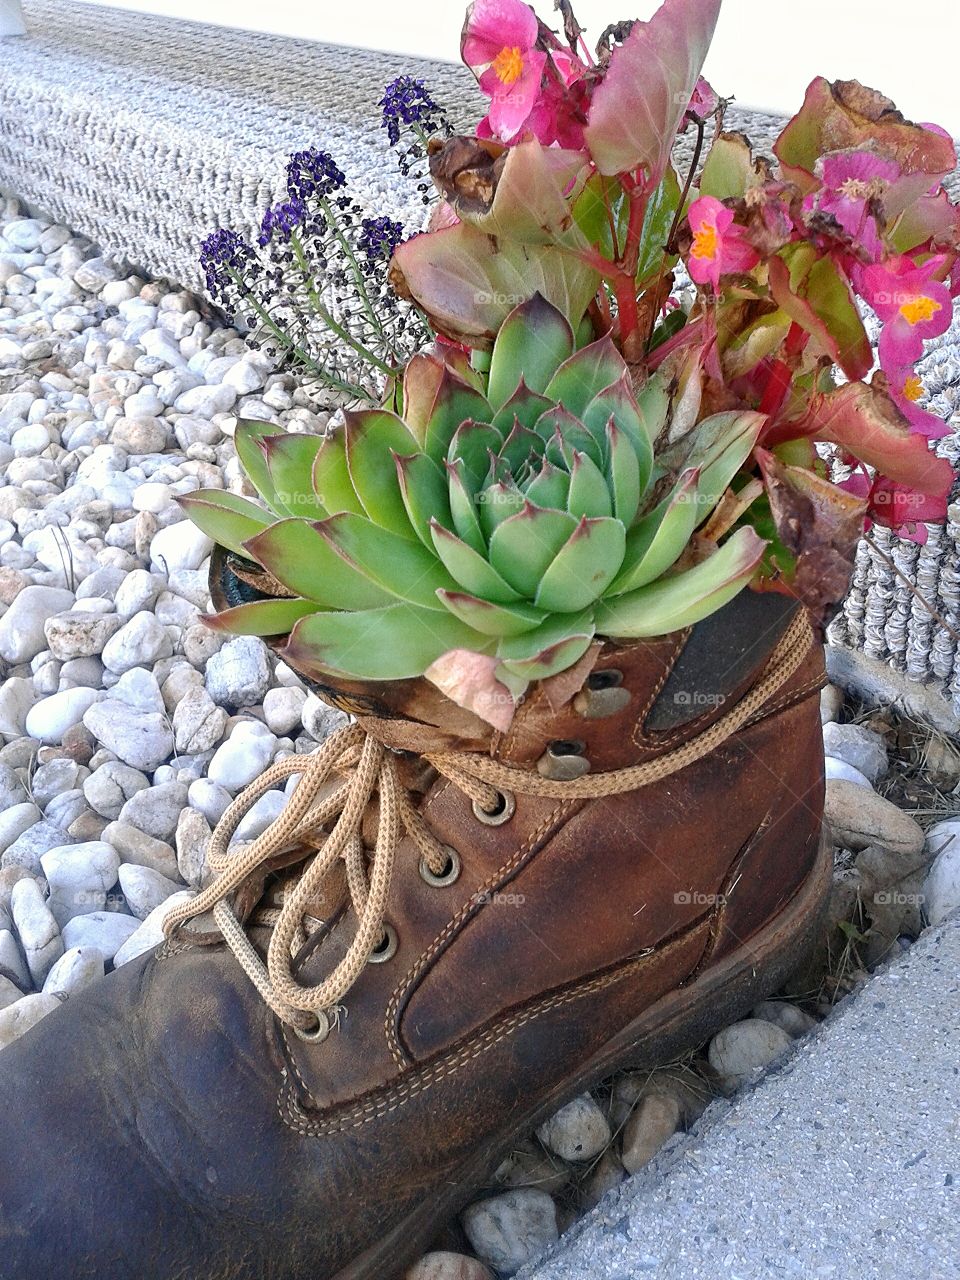 Garden boot.. Planted up so nicely and getting admired.